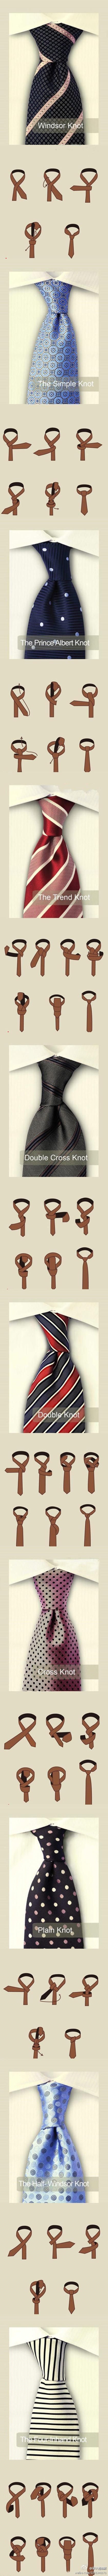 How to tie a tie…thank God someone put this on here..